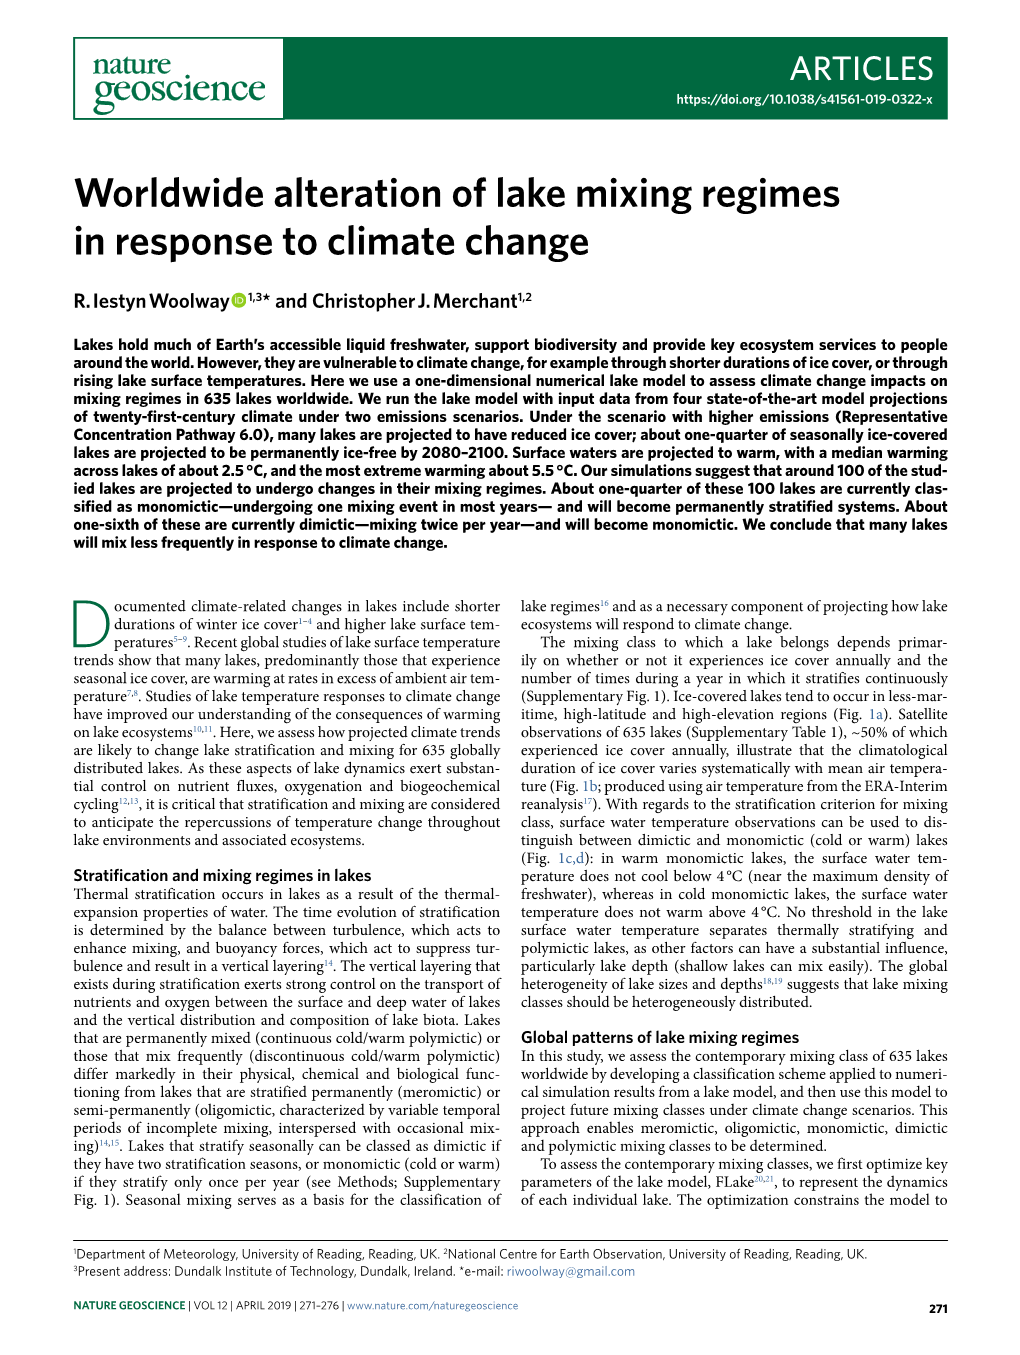 Worldwide Alteration of Lake Mixing Regimes in Response to Climate Change